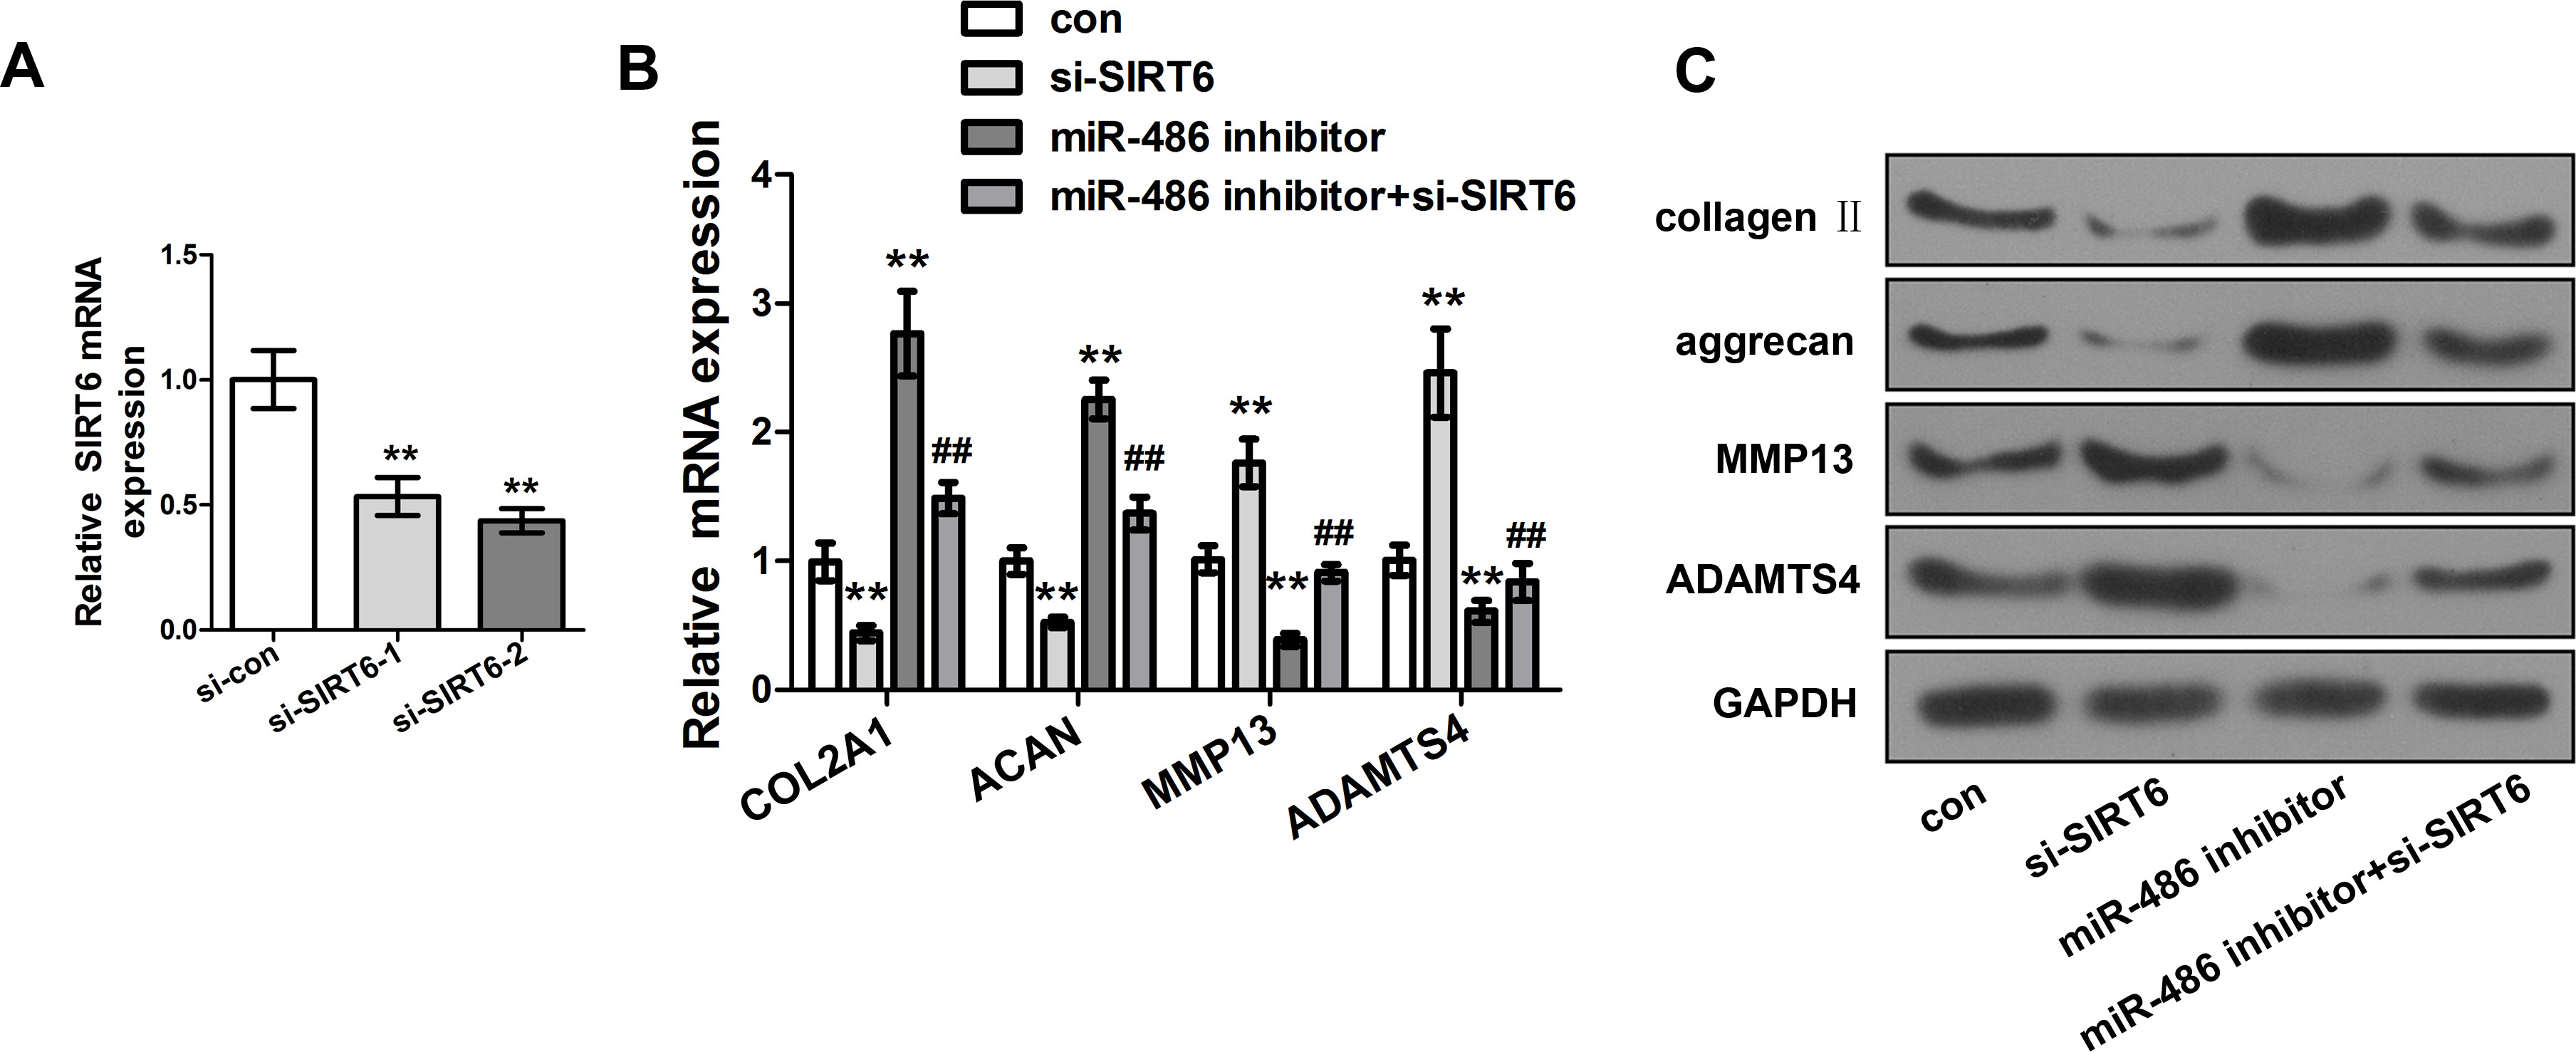 Fig. 4 
            Silencing information regulator 6 (SIRT6) as a target for microRNA 486 (miR-486)-induced chondrocyte extracellular matrix (ECM) metabolism. a) Detection of the messenger RNA (mRNA) expression level of SIRT6 in small interfering RNA-control (si-con) or si-SIRT6 transfected SW1353 cells by quantitative real-time polymerase chain reaction (qRT-PCR). b) Detection of the mRNA expression levels of collagen, type II, alpha 1 (COL2A1), aggrecan (ACAN), matrix metalloproteinase (MMP)-13, and ACANase 4 (ADAMTS4) in miR-486 inhibitor or si-SIRT6 co-transfected SW1353 cells by qRT-PCR. c) Detection of the protein expression levels of COL2A1, aggrecan, MMP-13, and ADAMTS4 in miR-486 inhibitor or si-SIRT6 co-transfected SW1353 cells by western blot. Compared to the control group, **p < 0.001; compared to the miR-486 inhibitor group, ##p < 0.001. All statistical analyses were conducted with independent-samples t-test.
          